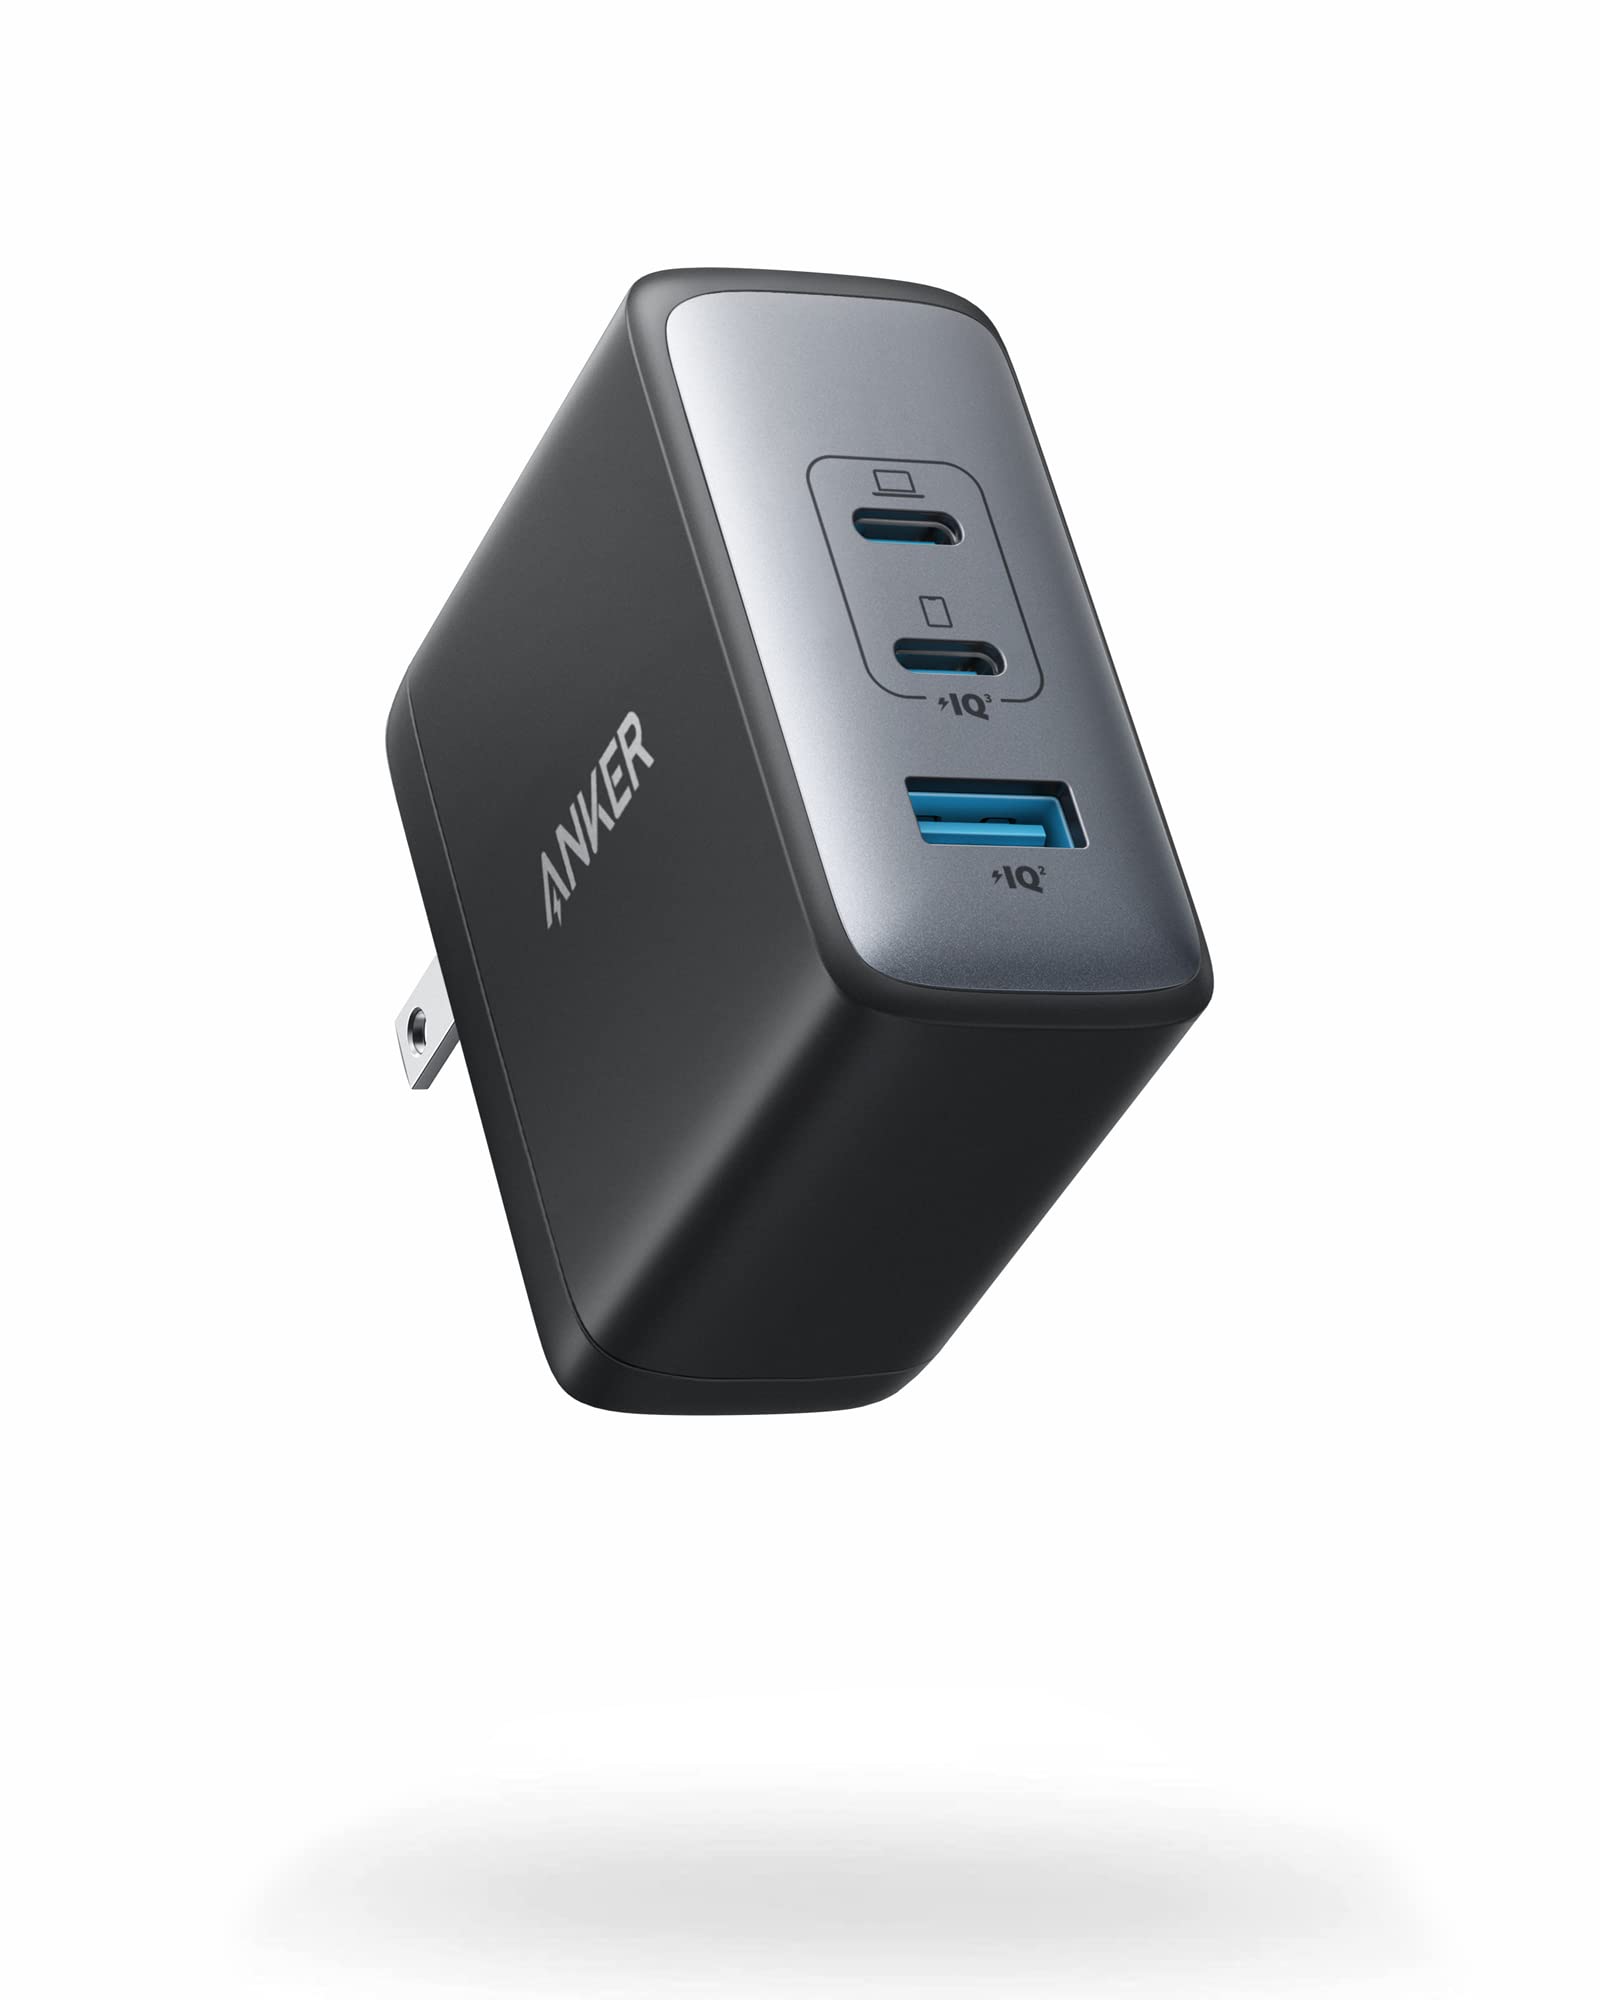 Anker USB-C 736 GaN 3-Port 100W Charger (Black or White) $43 + Free Shipping